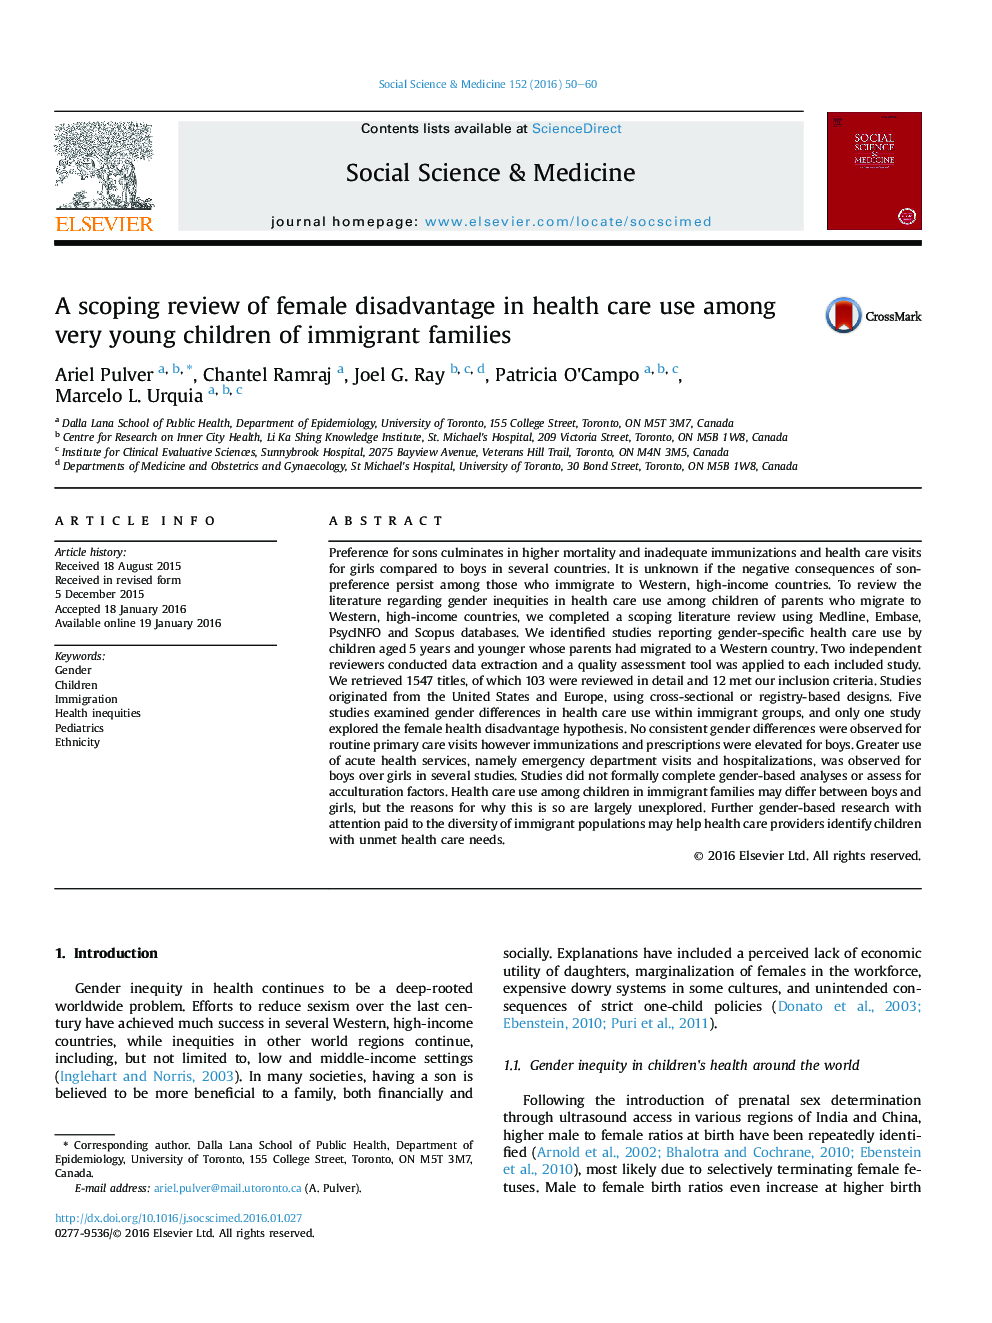 A scoping review of female disadvantage in health care use among very young children of immigrant families